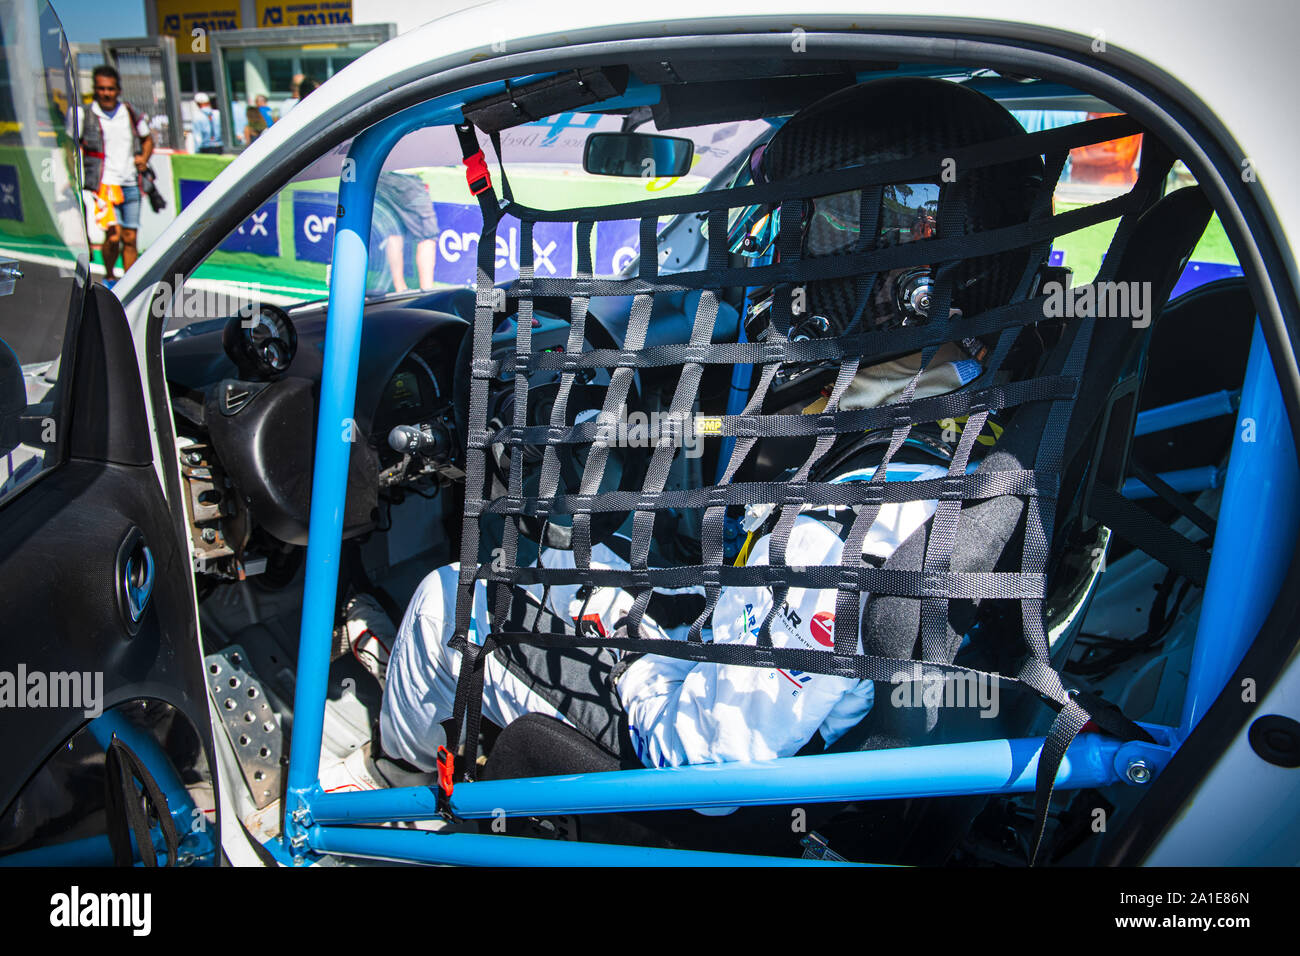 Vallelunga, Italy september 14 2019. Side view of racing driver in Smart fortwo electric engine racing car on grid Stock Photo